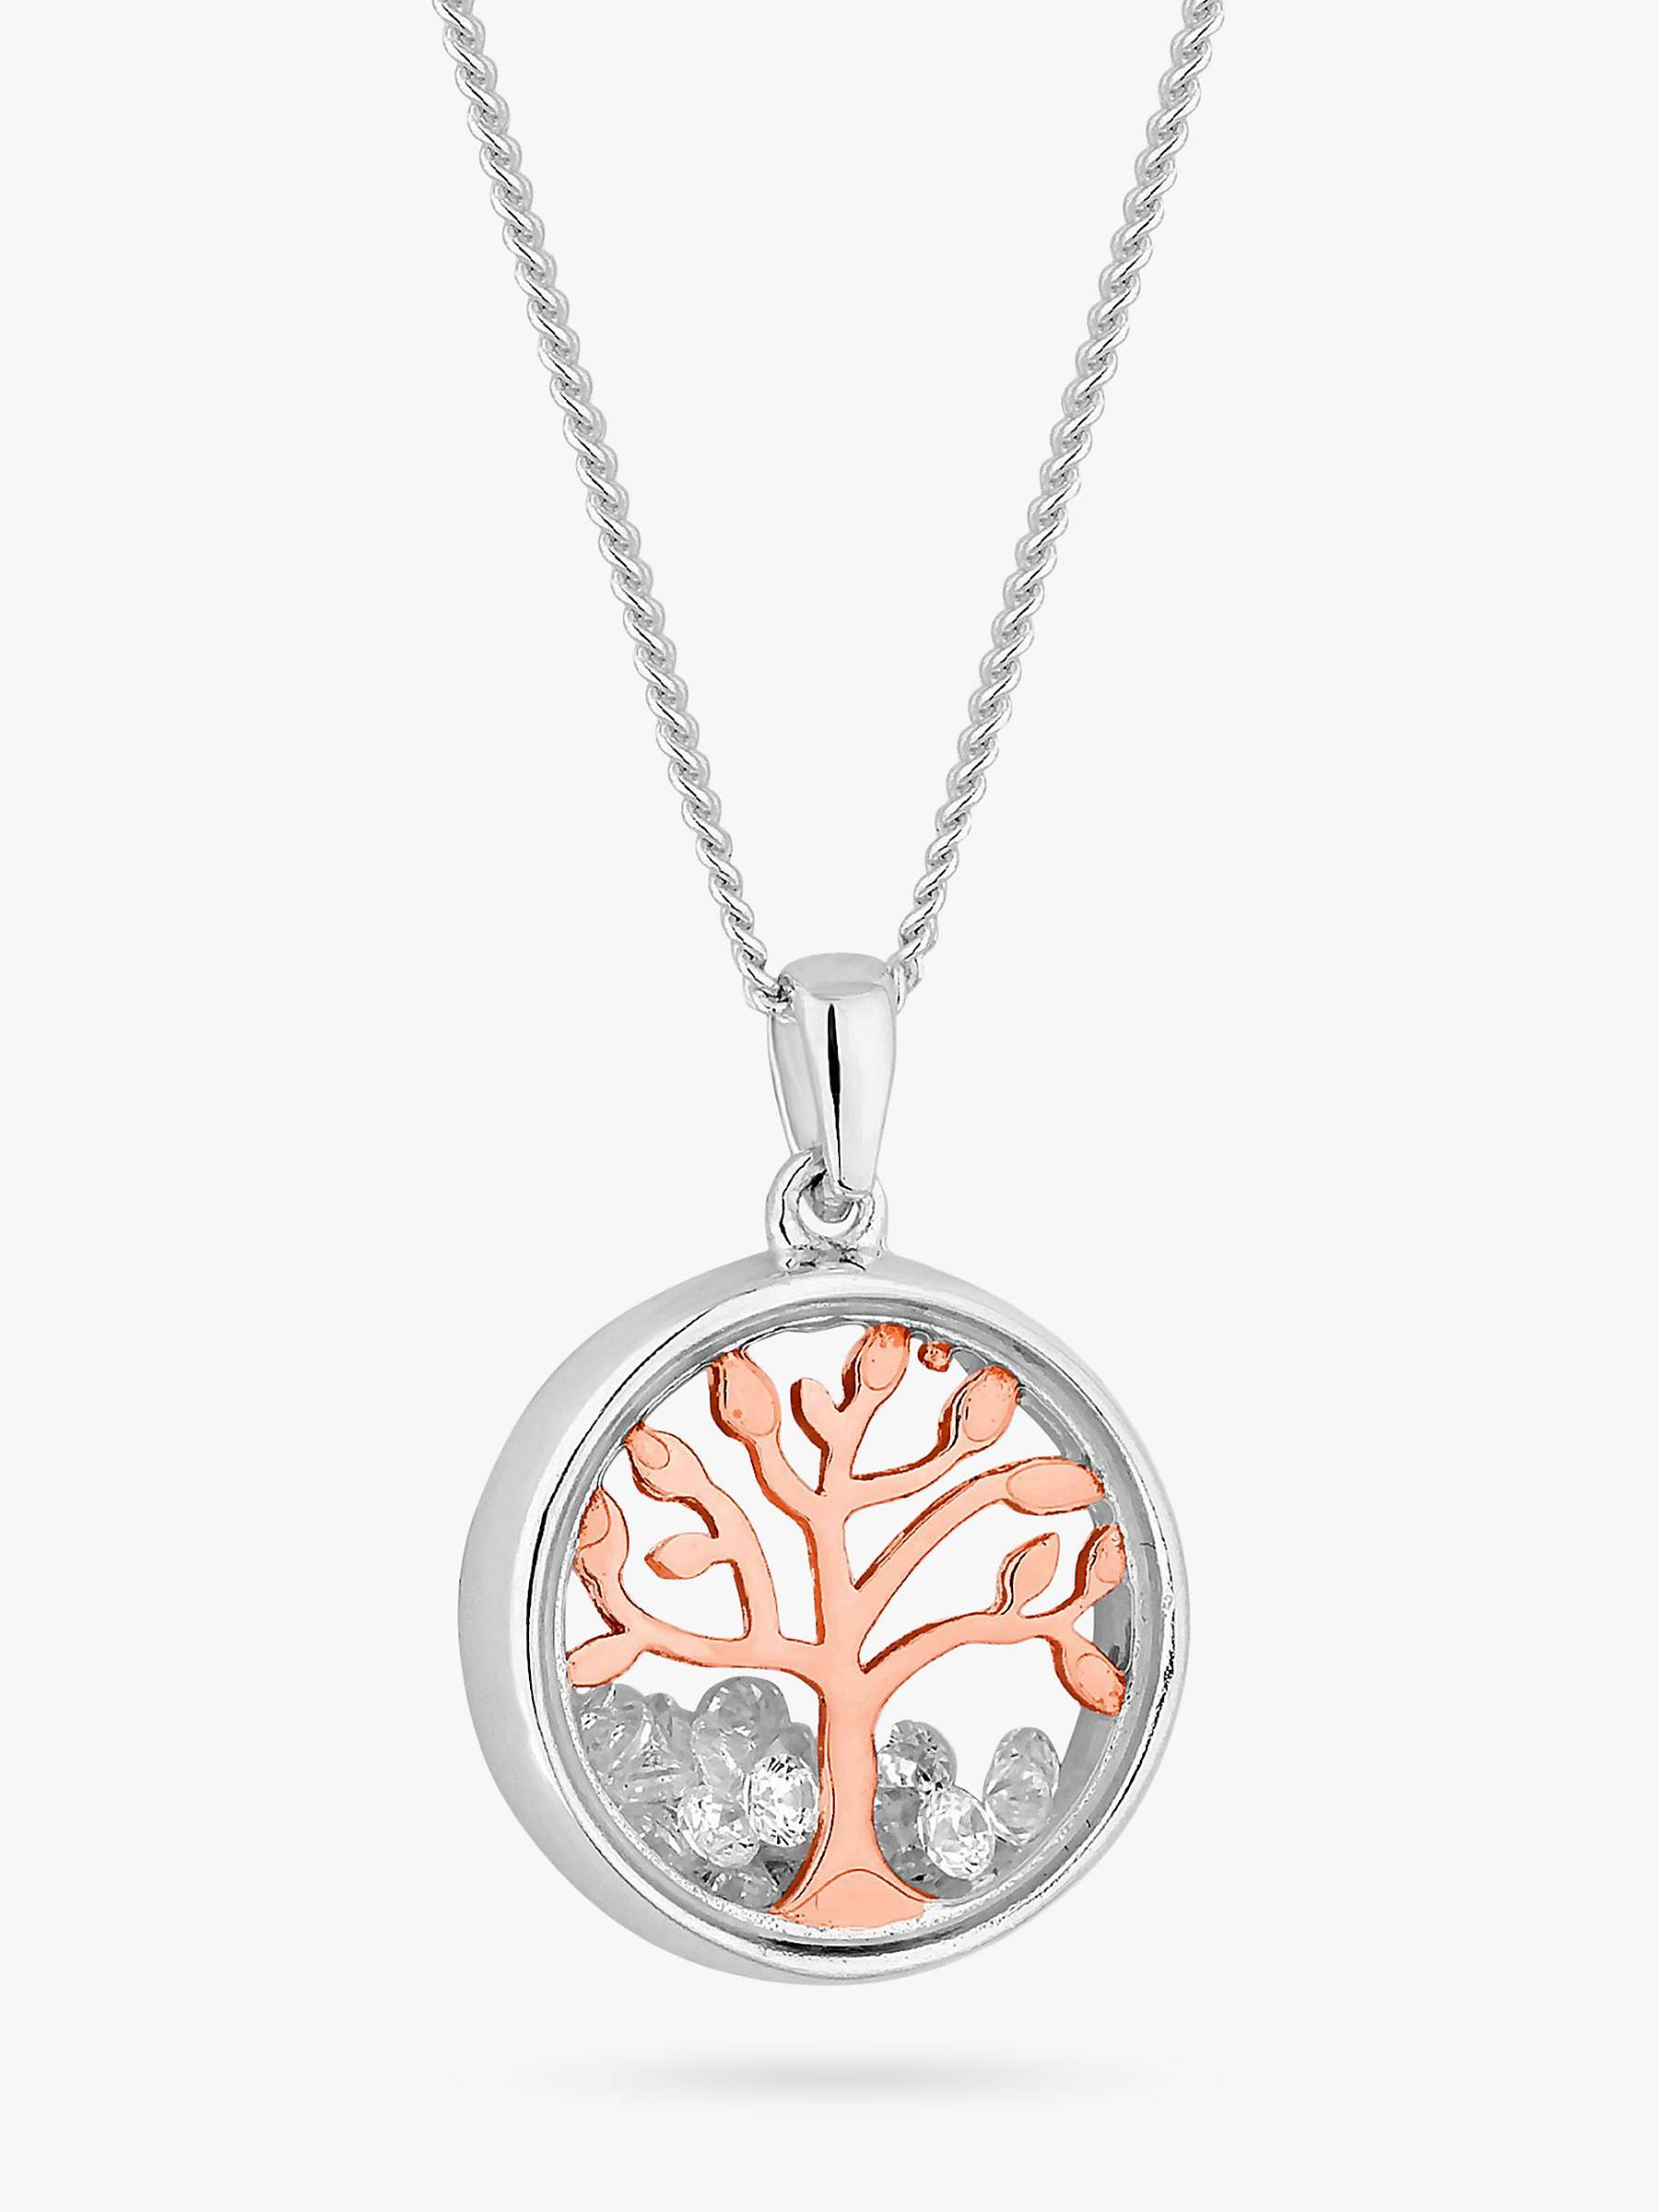 Buy Simply Silver Tree of Love Shaker Pendant Necklace, Silver/Rose Gold Online at johnlewis.com